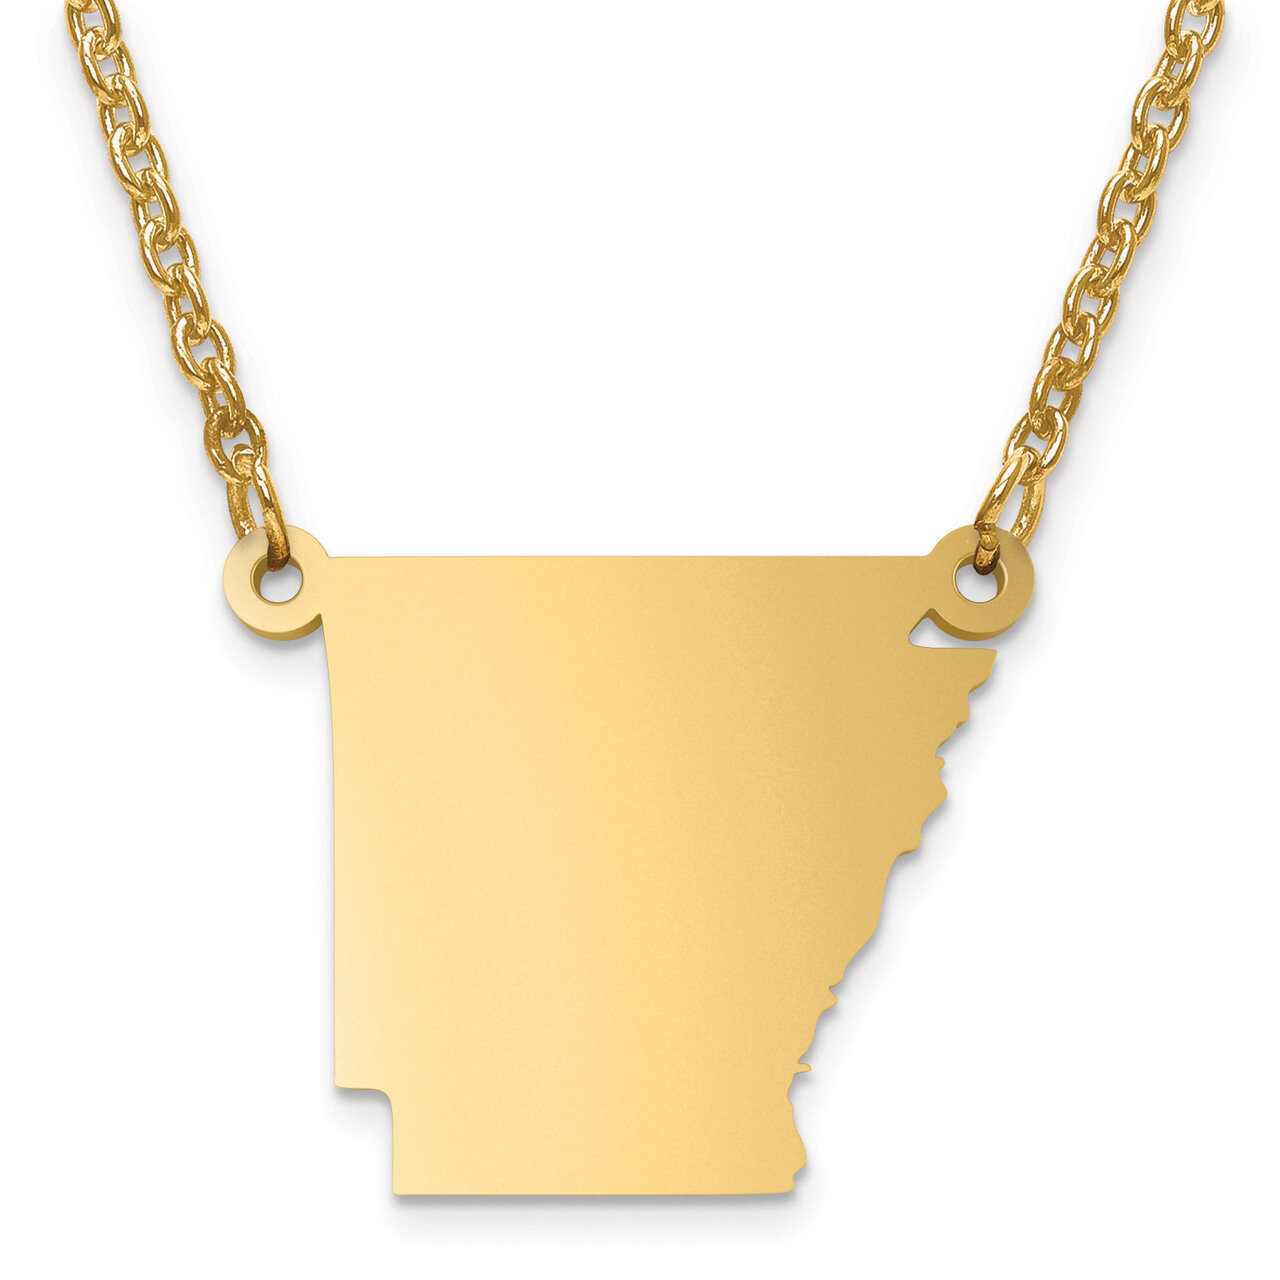 Arkansas State Pendant with Chain Engravable Gold-plated on Sterling Silver